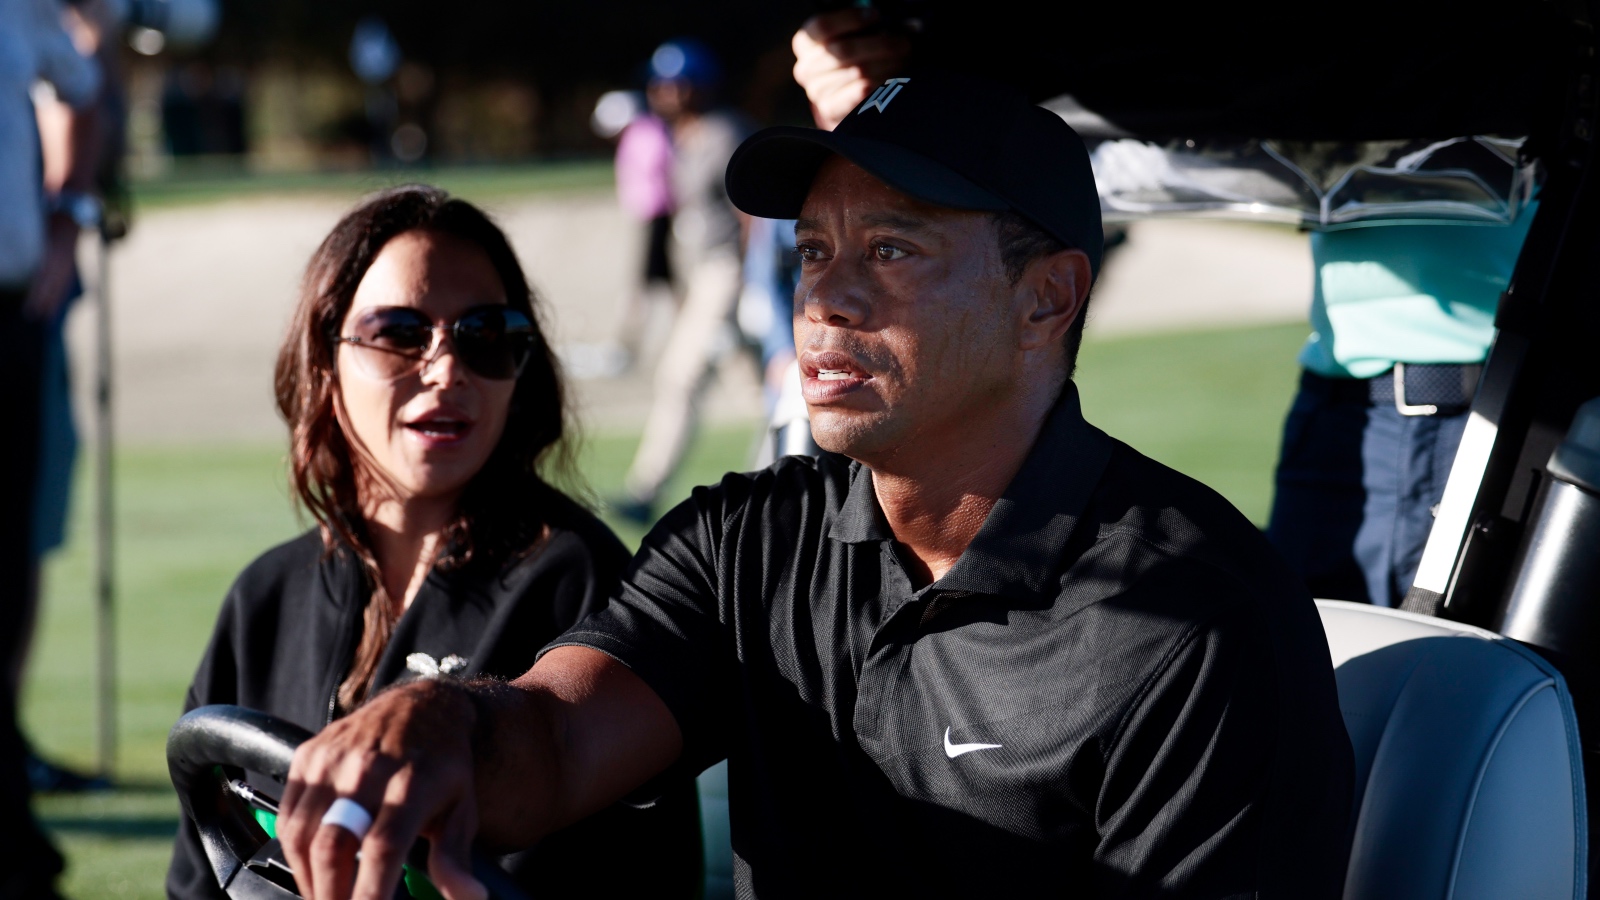 Tiger Woods and his ex girlfriend Erica Herman riding in a golf cart